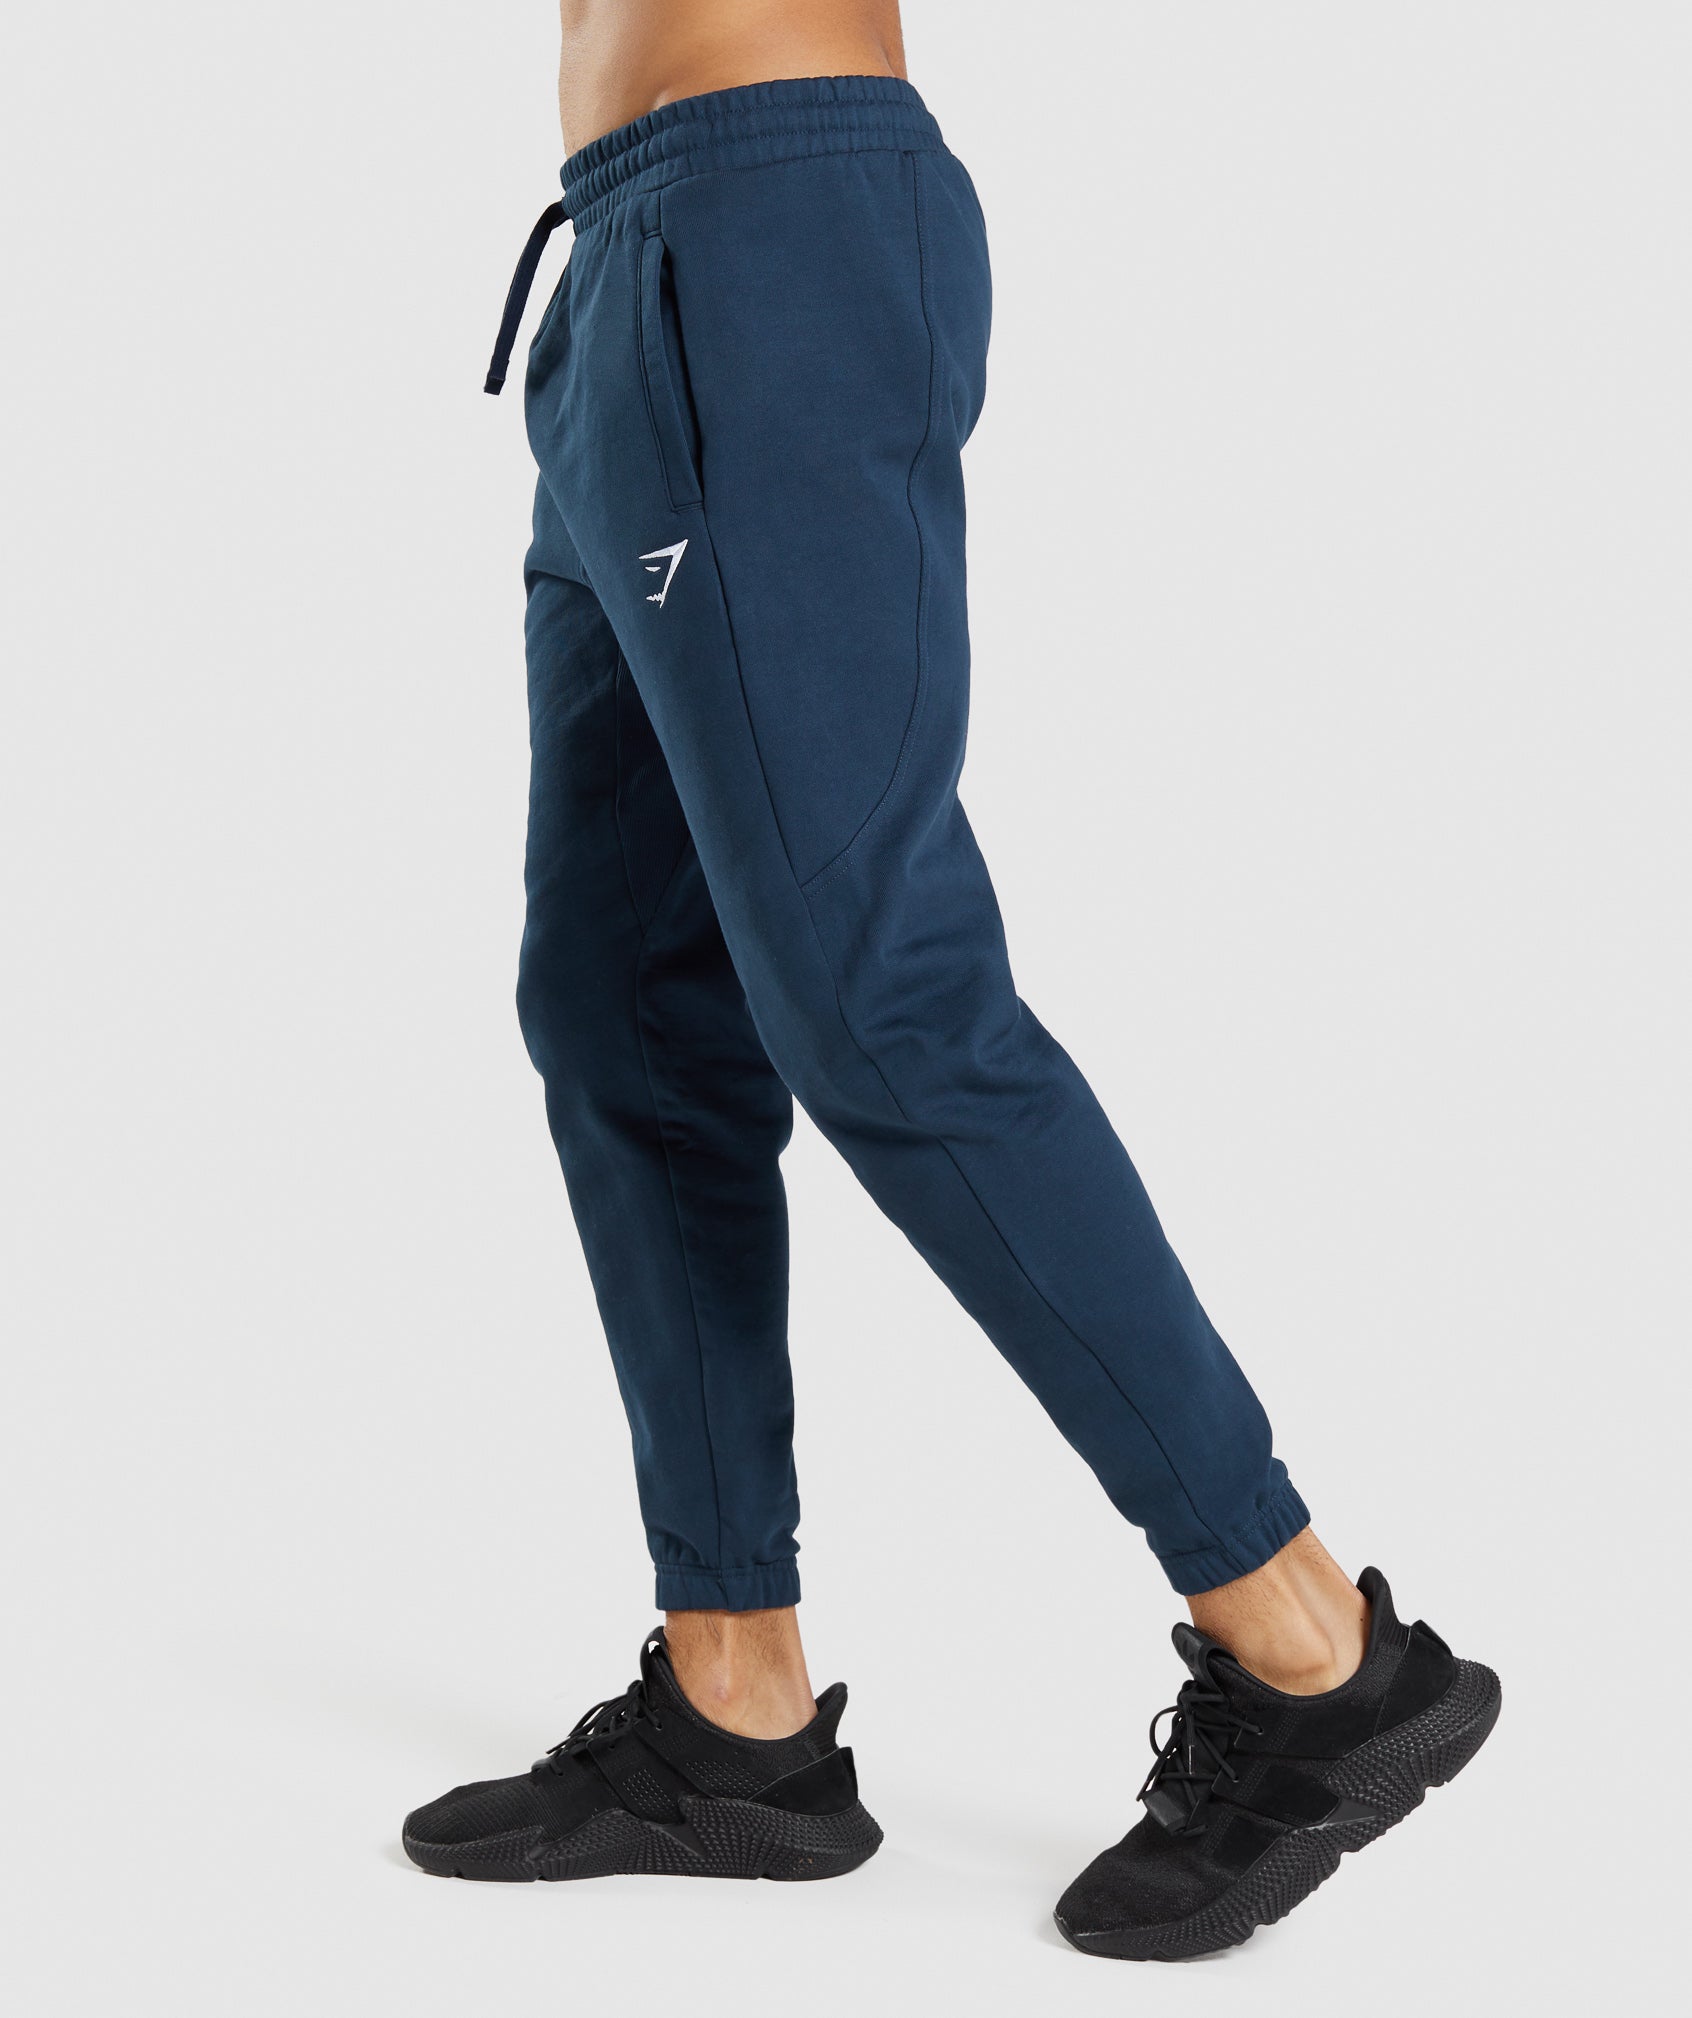 Essential Jogger in Navy - view 3